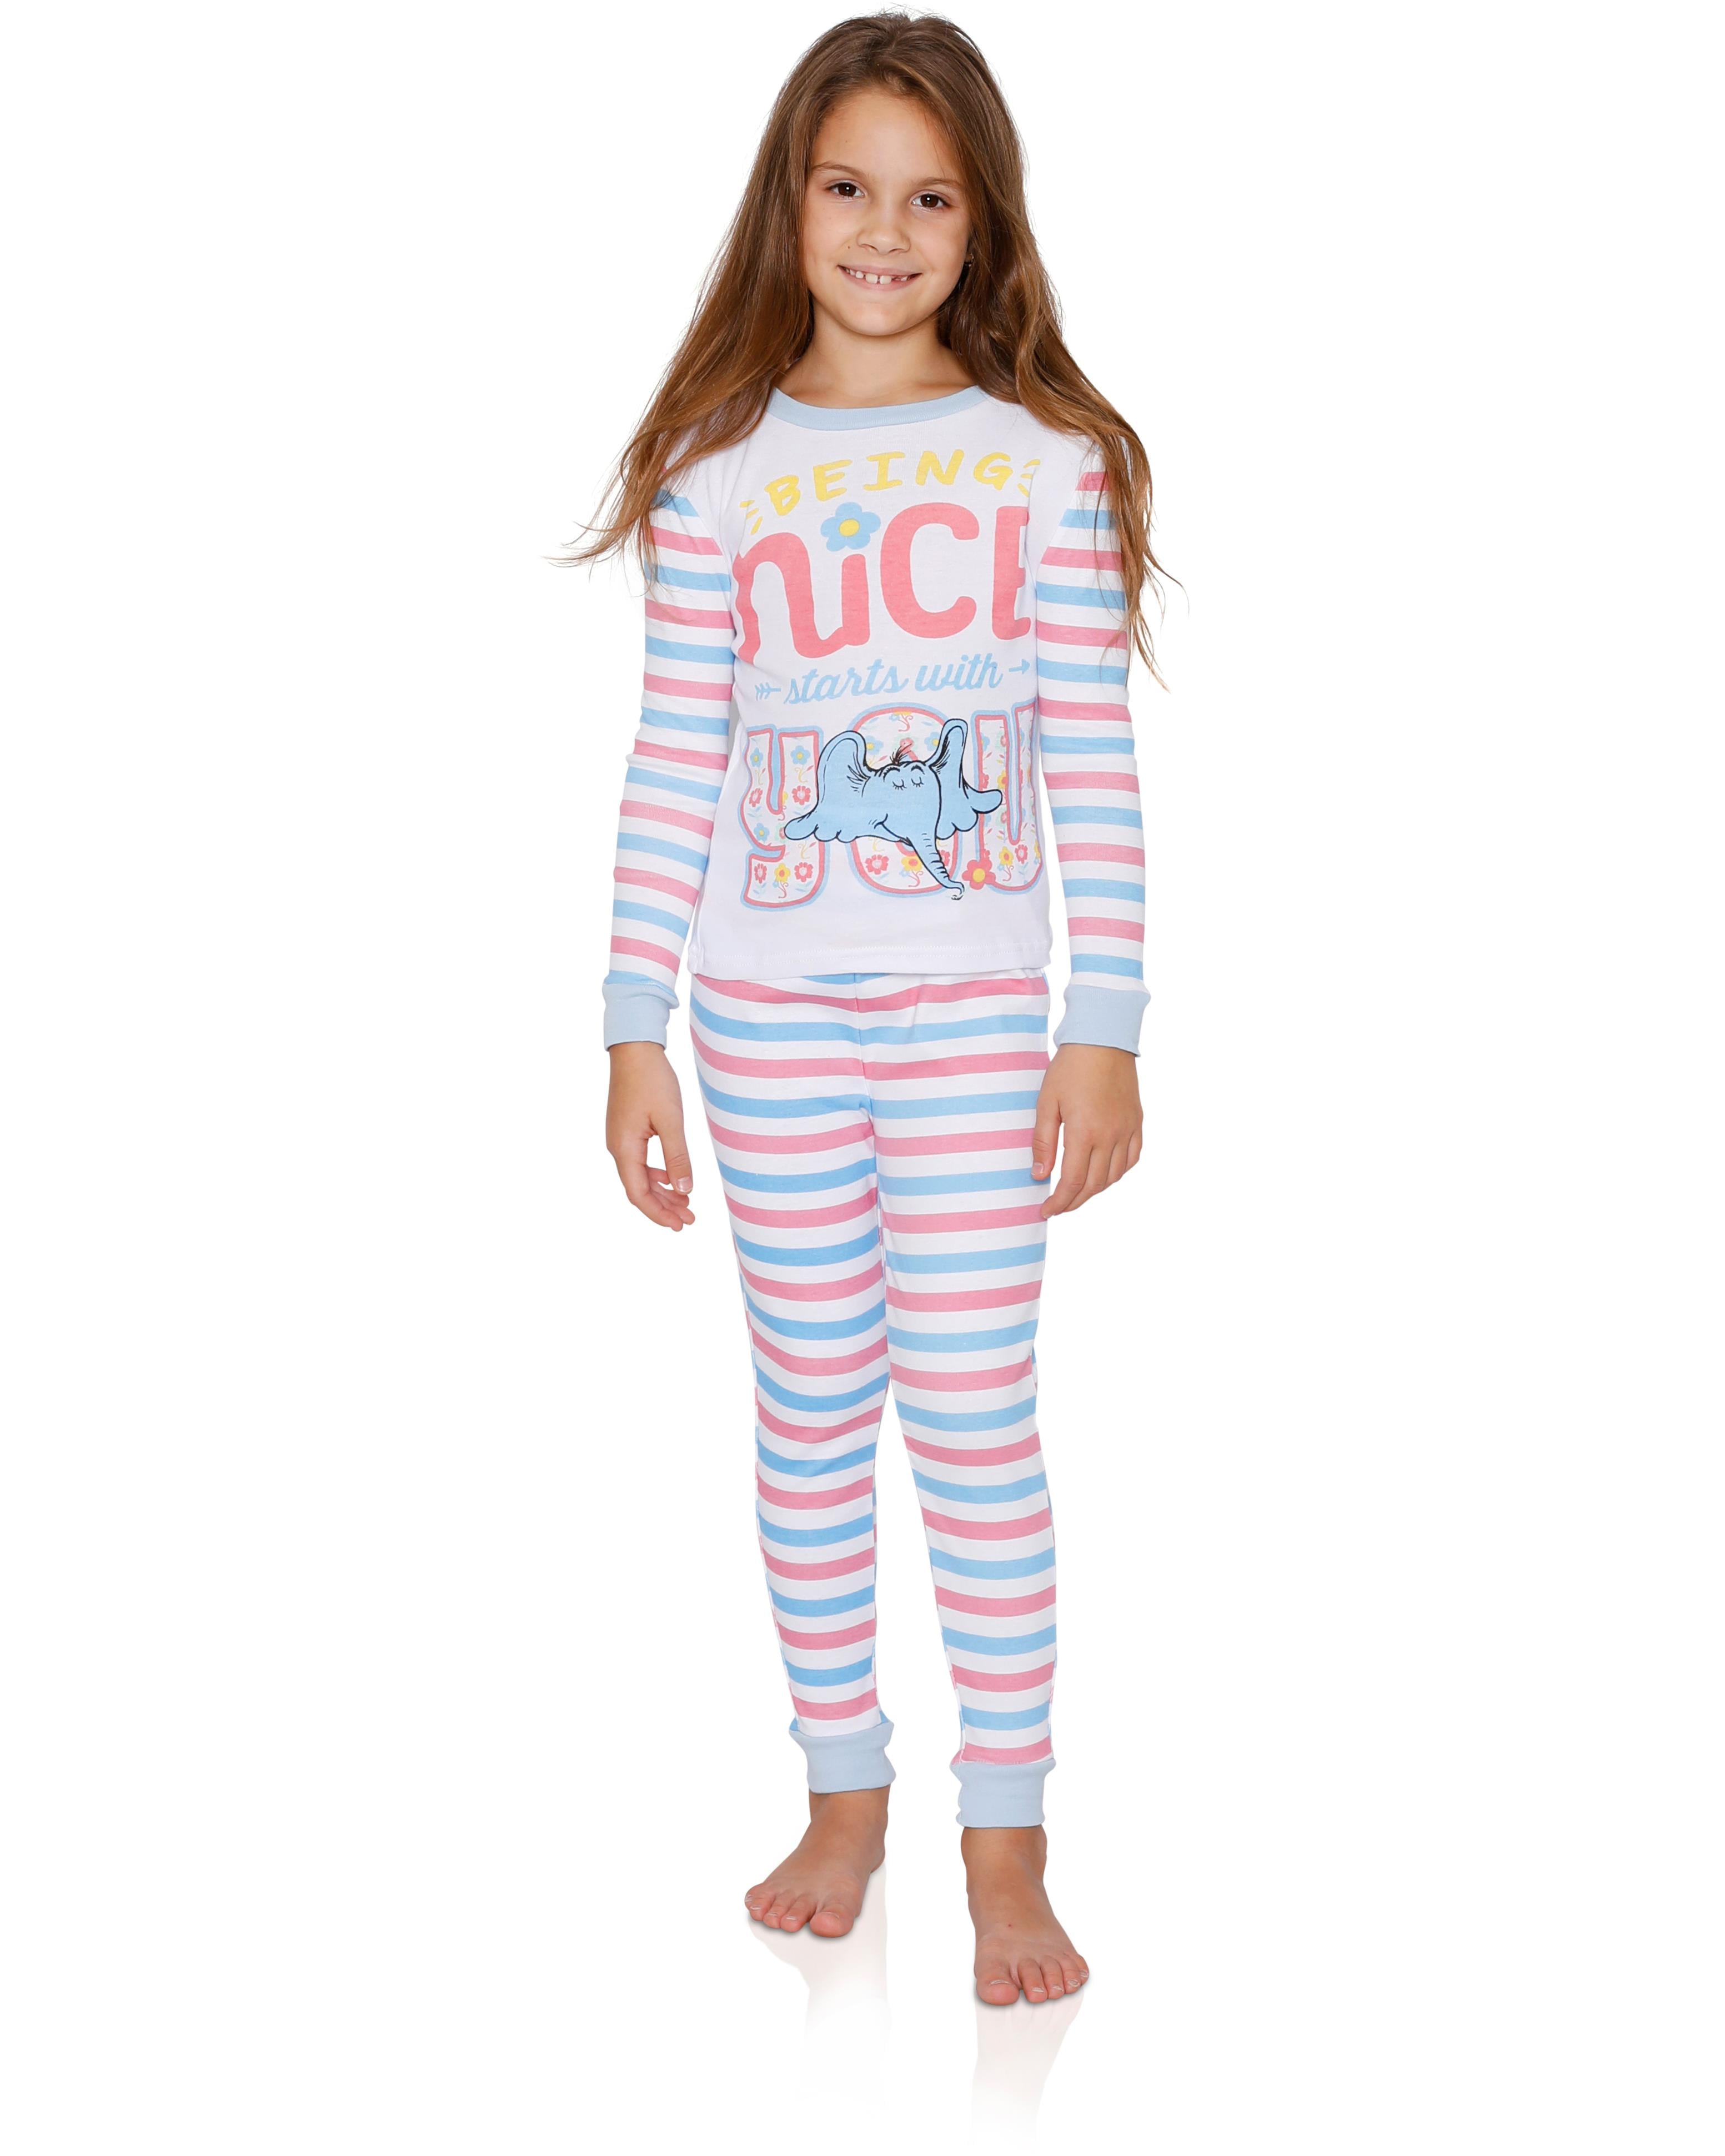 Dr Seuss Infant Girls Horton Hears a Who Short Sleeved Cotton 2-Pack Pajamas 